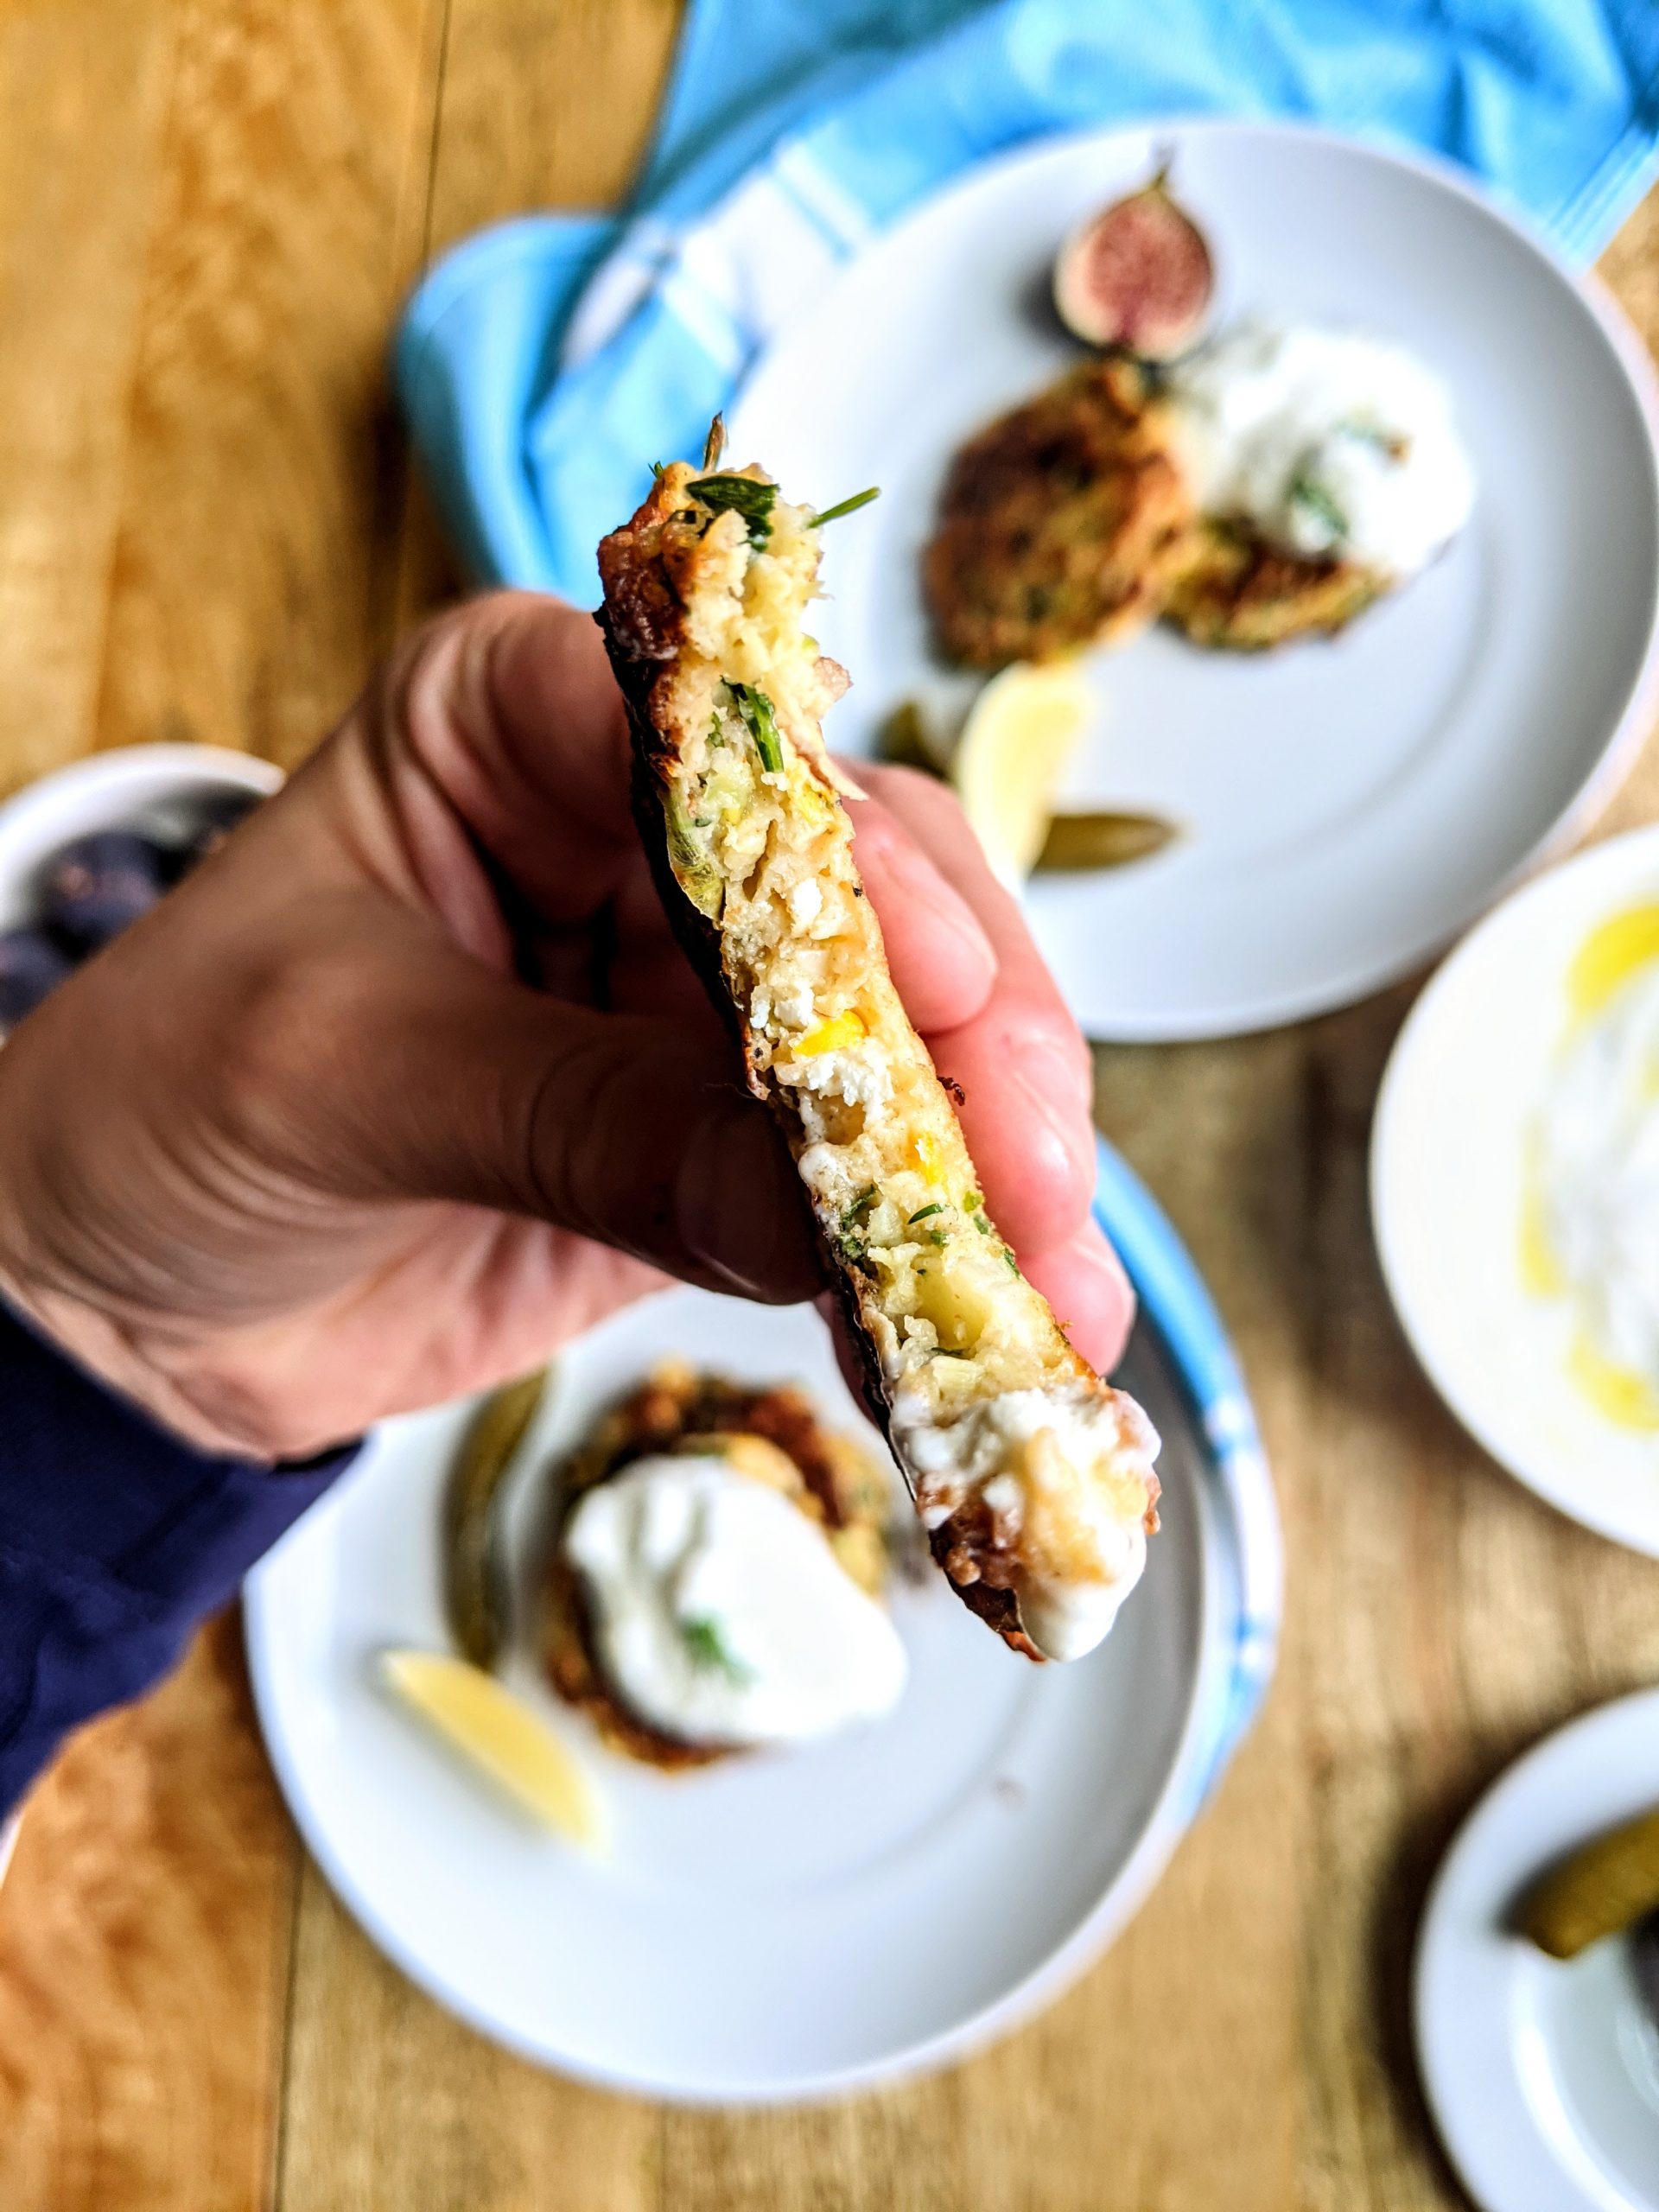 A Zucchini & Feta Fritter in a hand right after taking a bite.